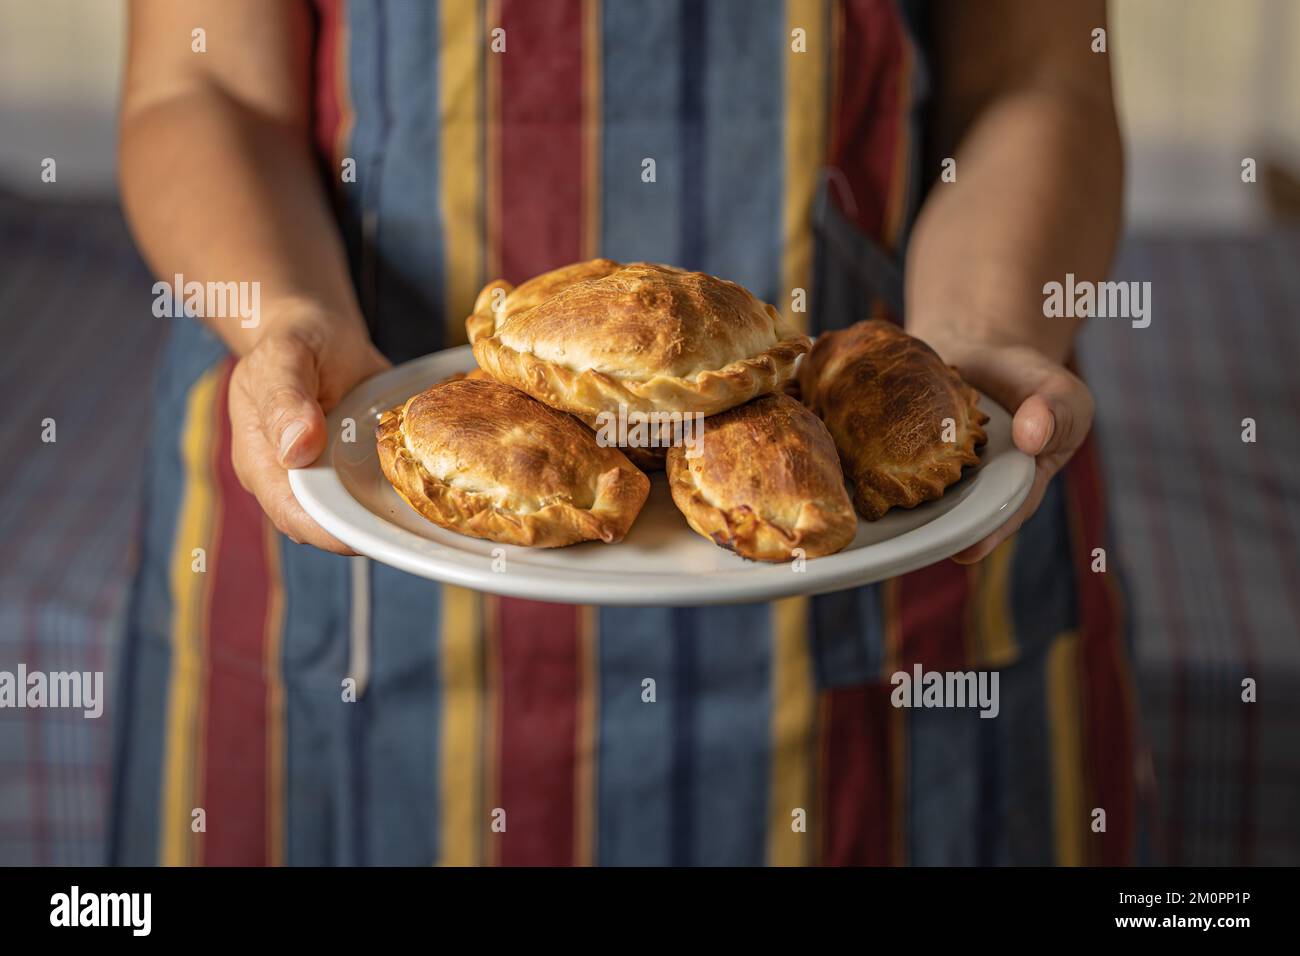 Woman in apron holding a tray with Argentine empanadas. Stock Photo